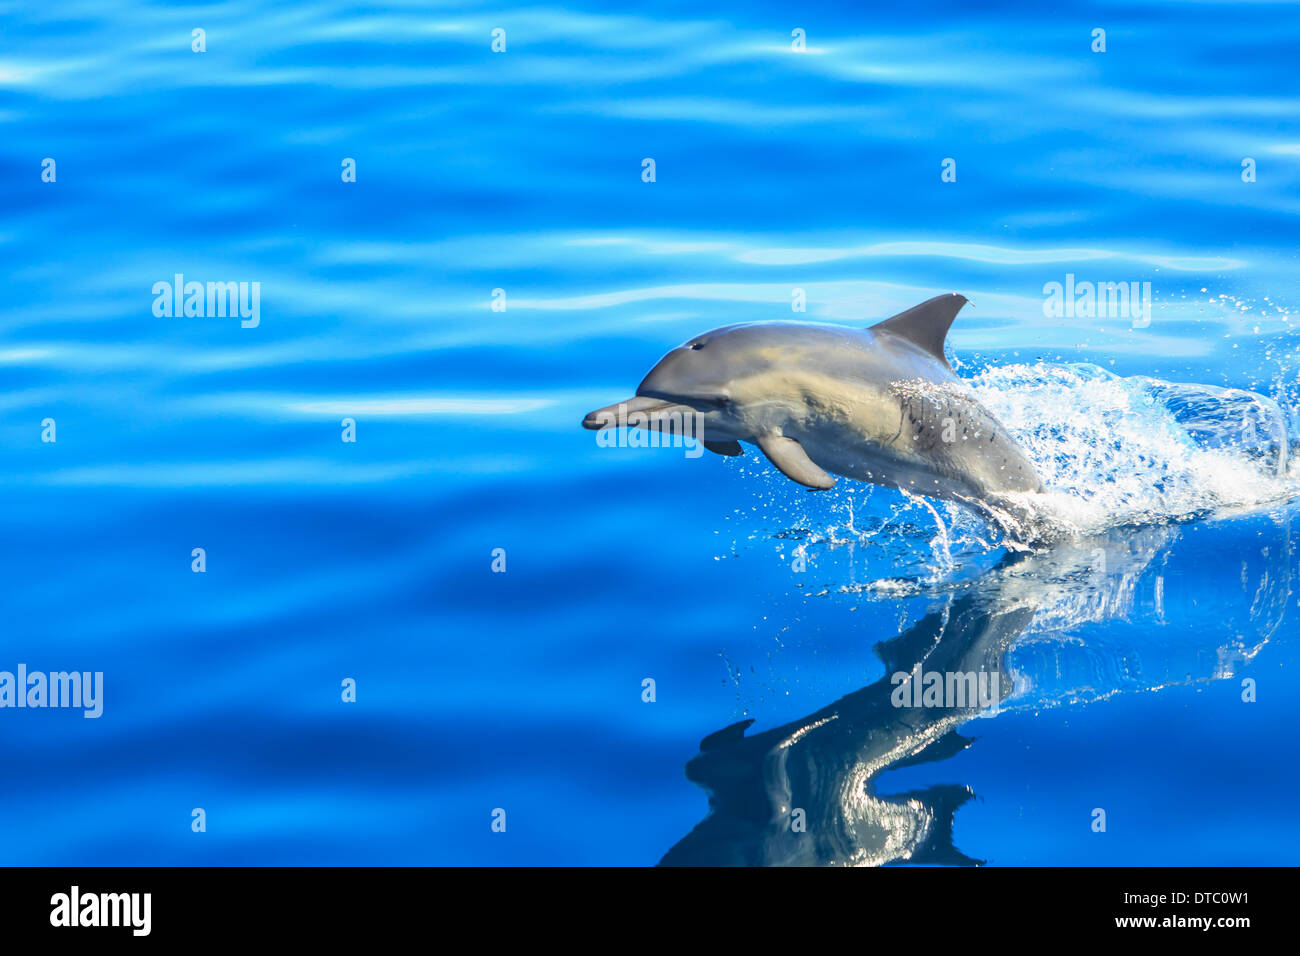 Single Long-beaked Common Dolphin (Delphinus capesis) jumping out of ocean, San Diego, California, USA Stock Photo